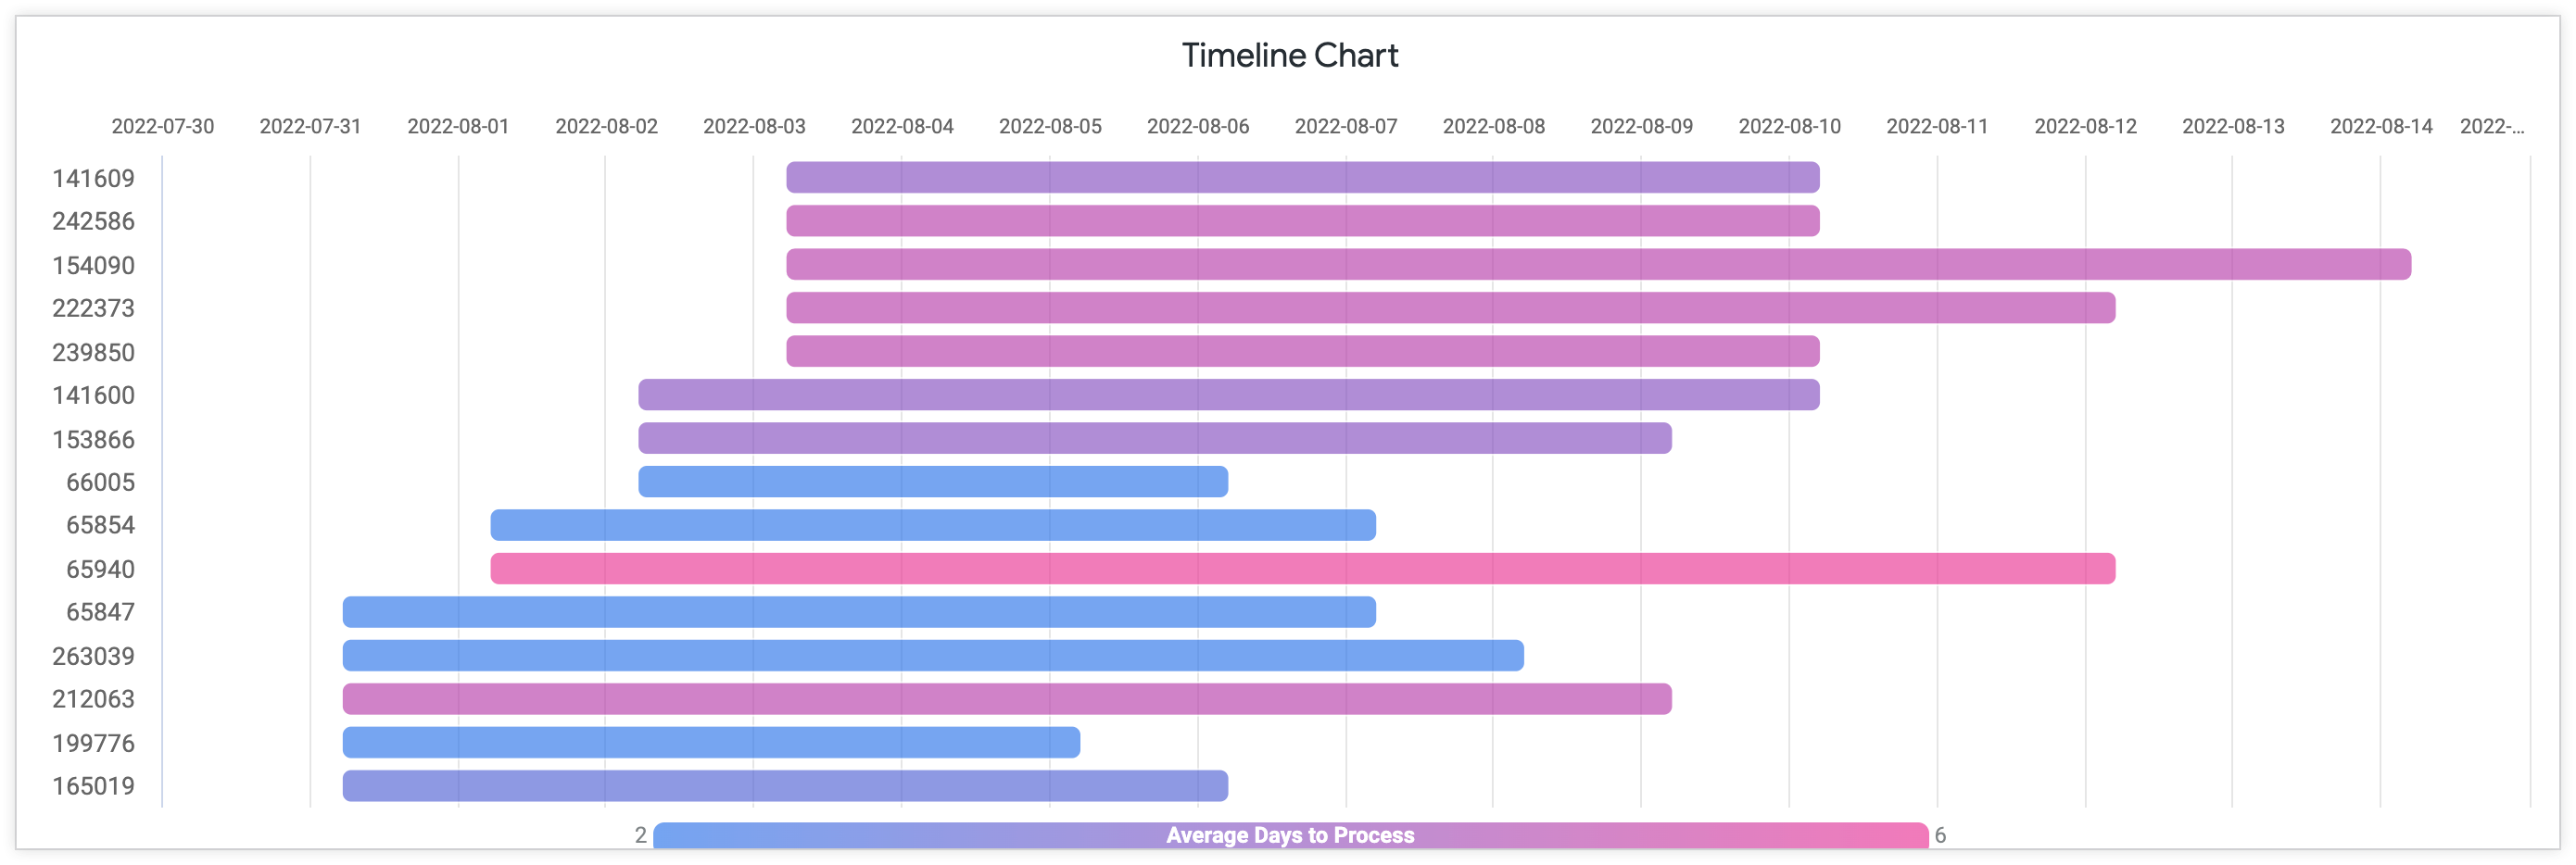 Timeline chart showing average days to process with Order ID on the y-axis and days from July to August 2022 on the x-axis.